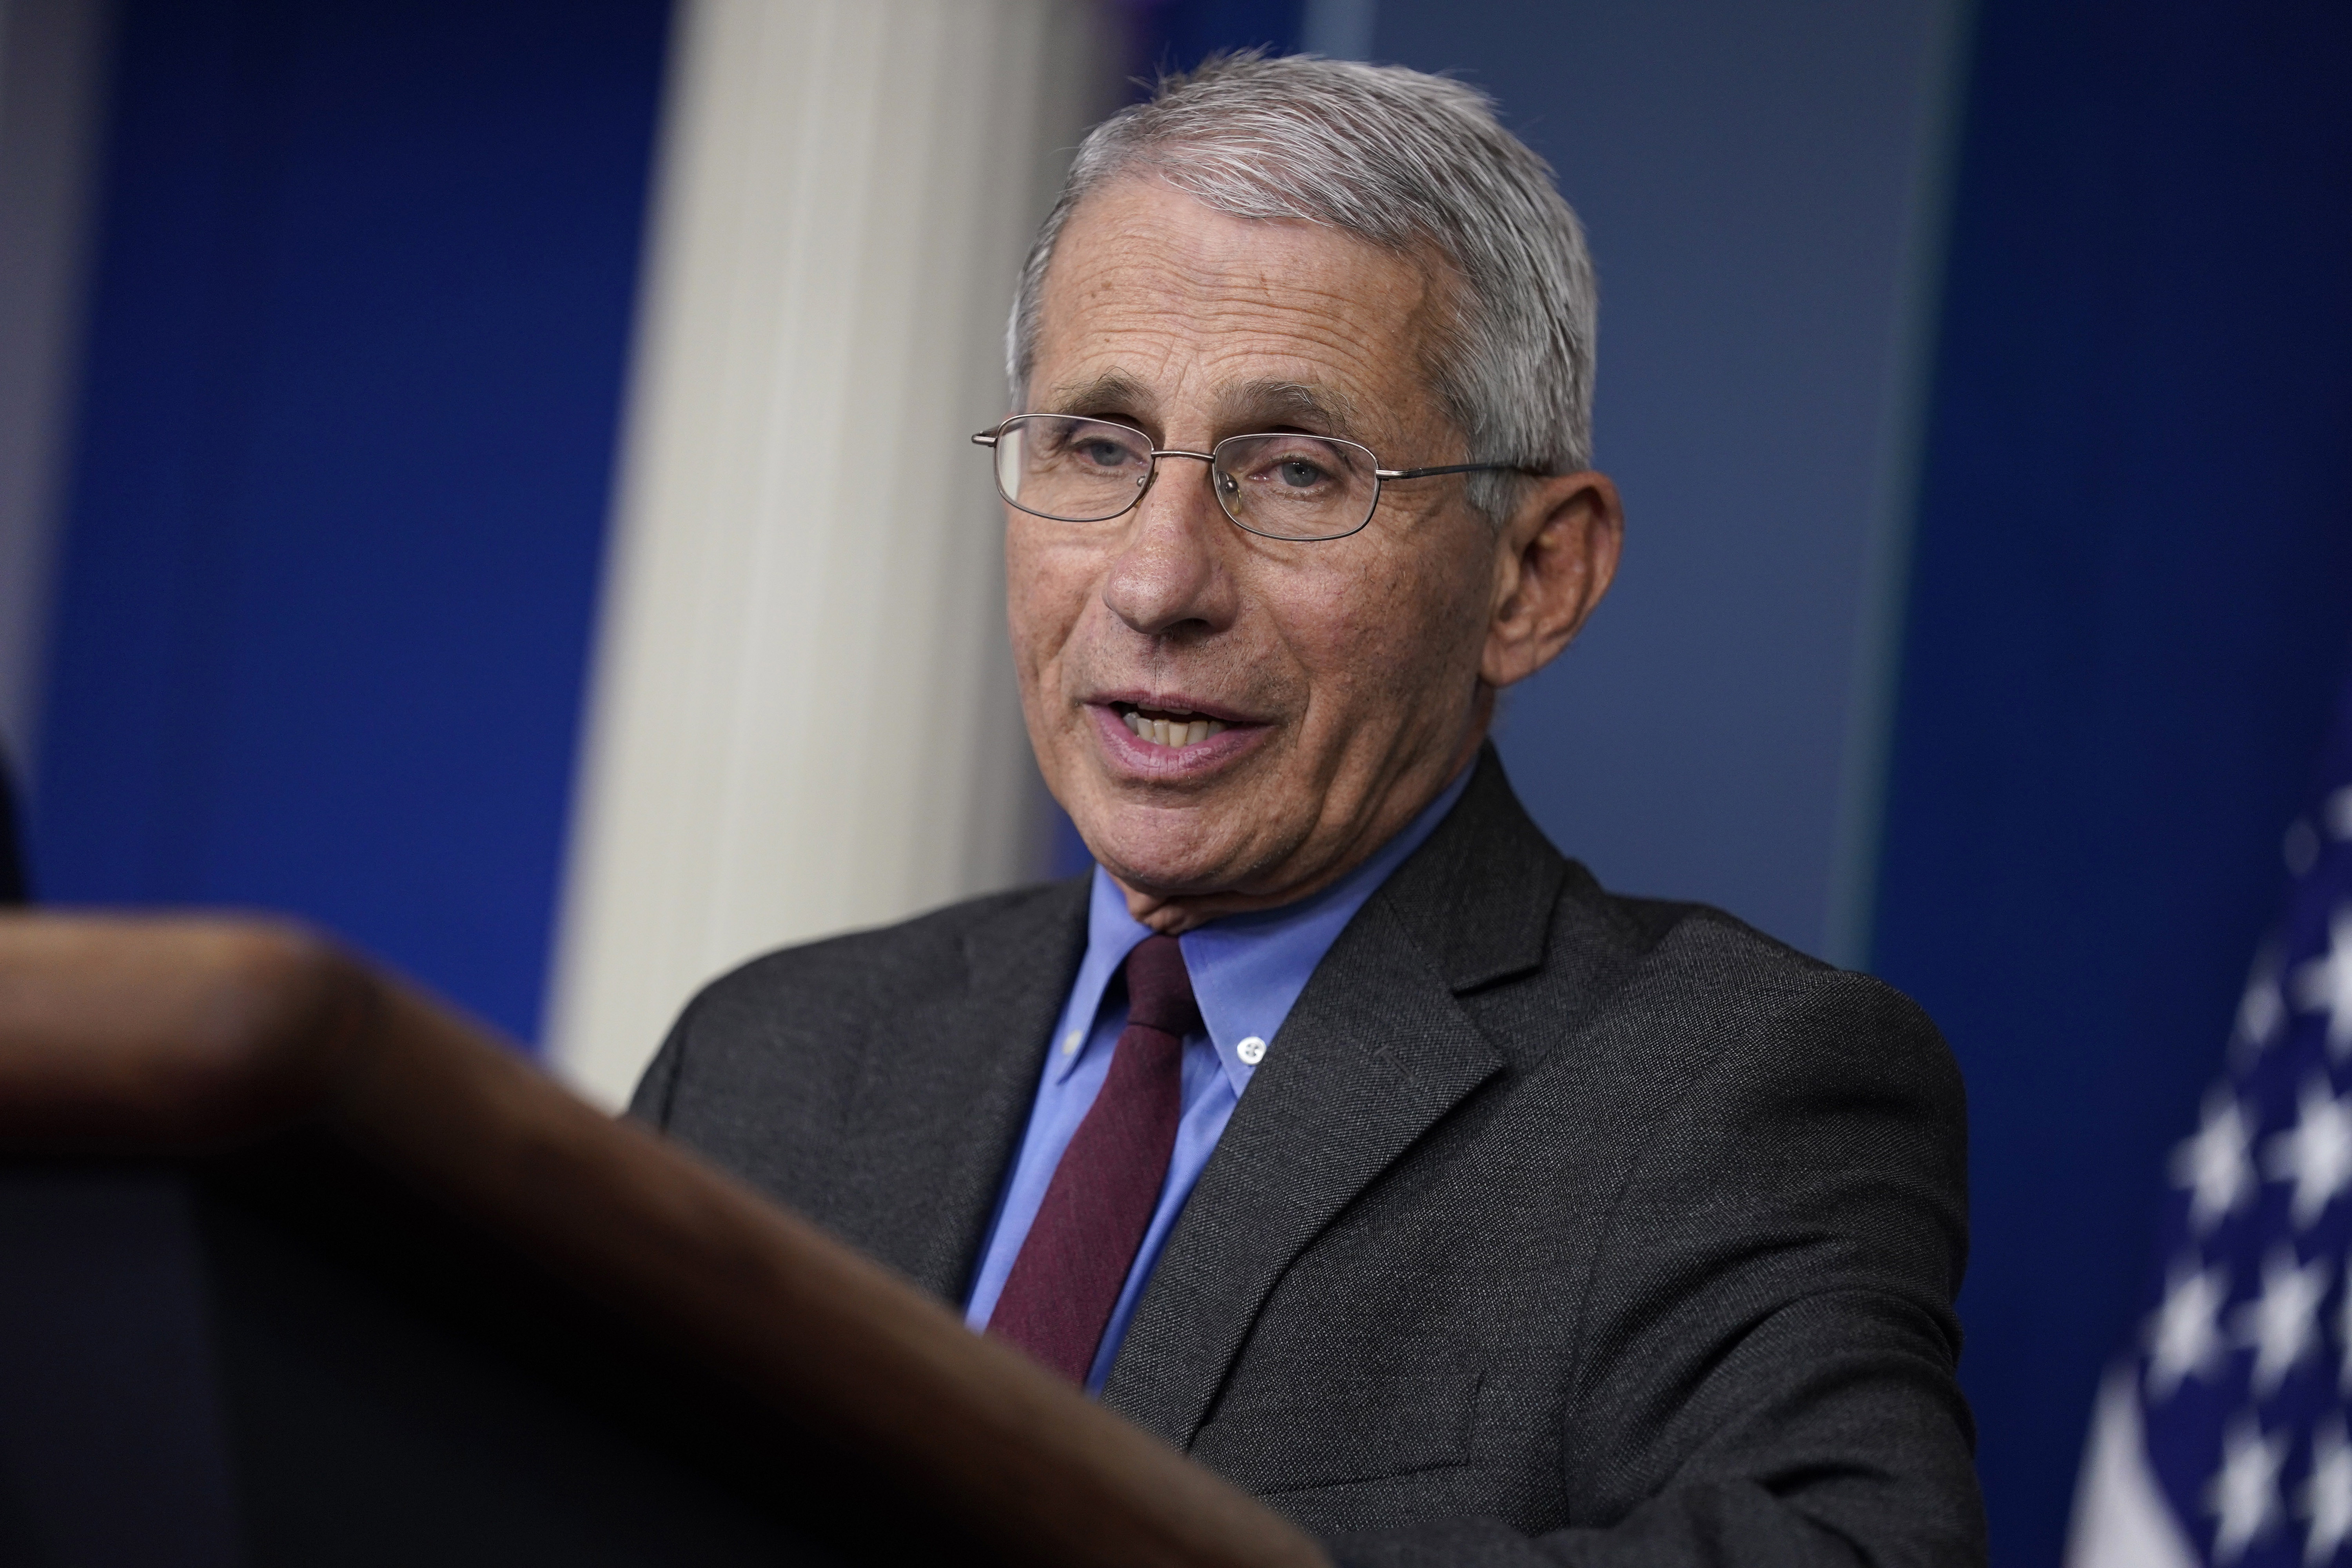 Director of the National Institute of Allergy and Infectious Diseases Dr. Anthony Fauci speaks during a coronavirus task force briefing at the White House on April 10.